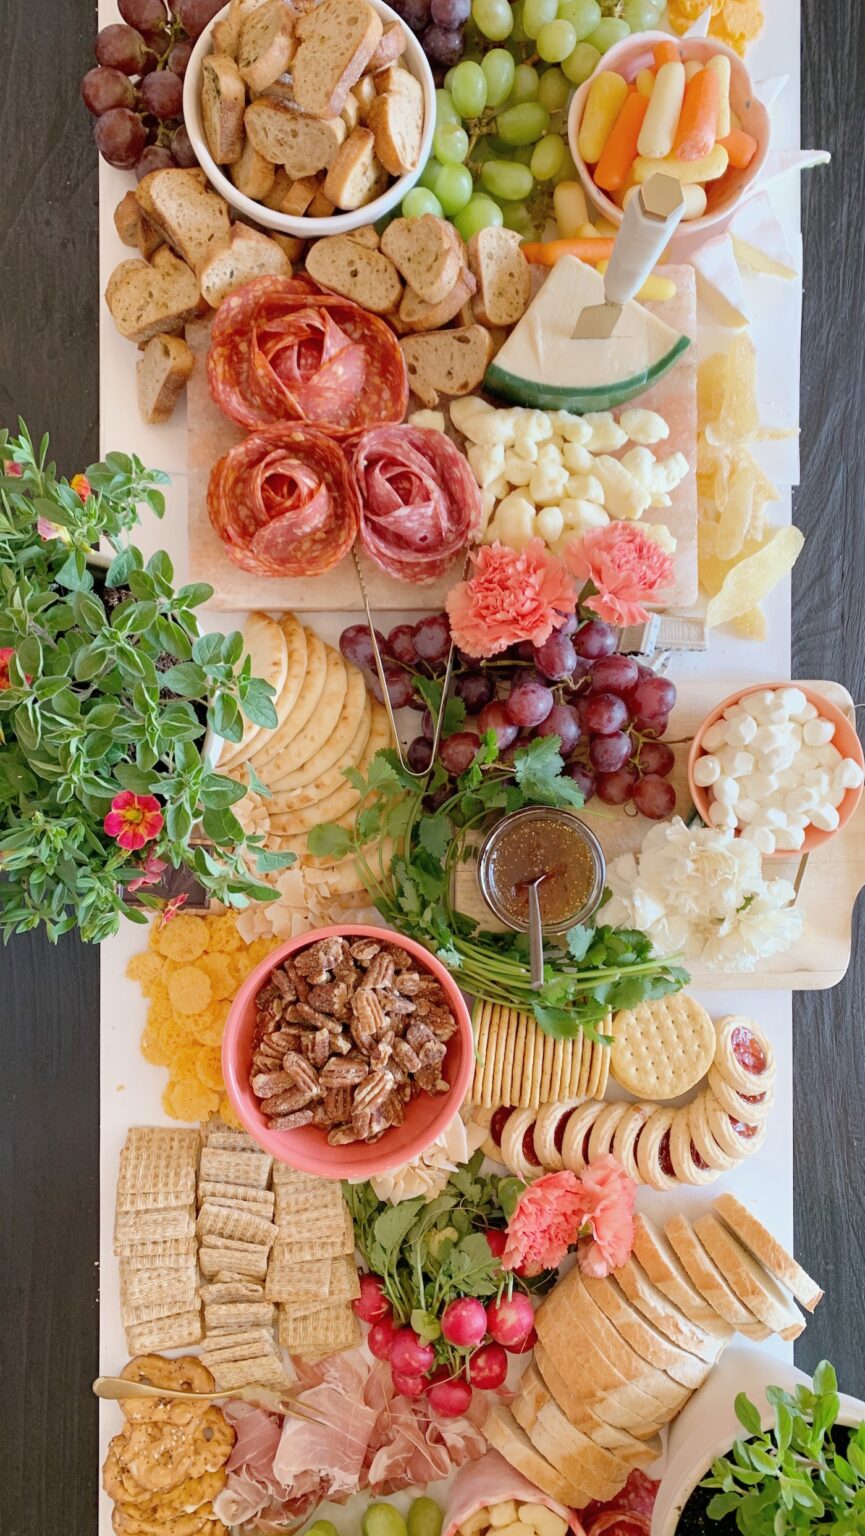 Garden Party Charcuterie Table - THE HIVE